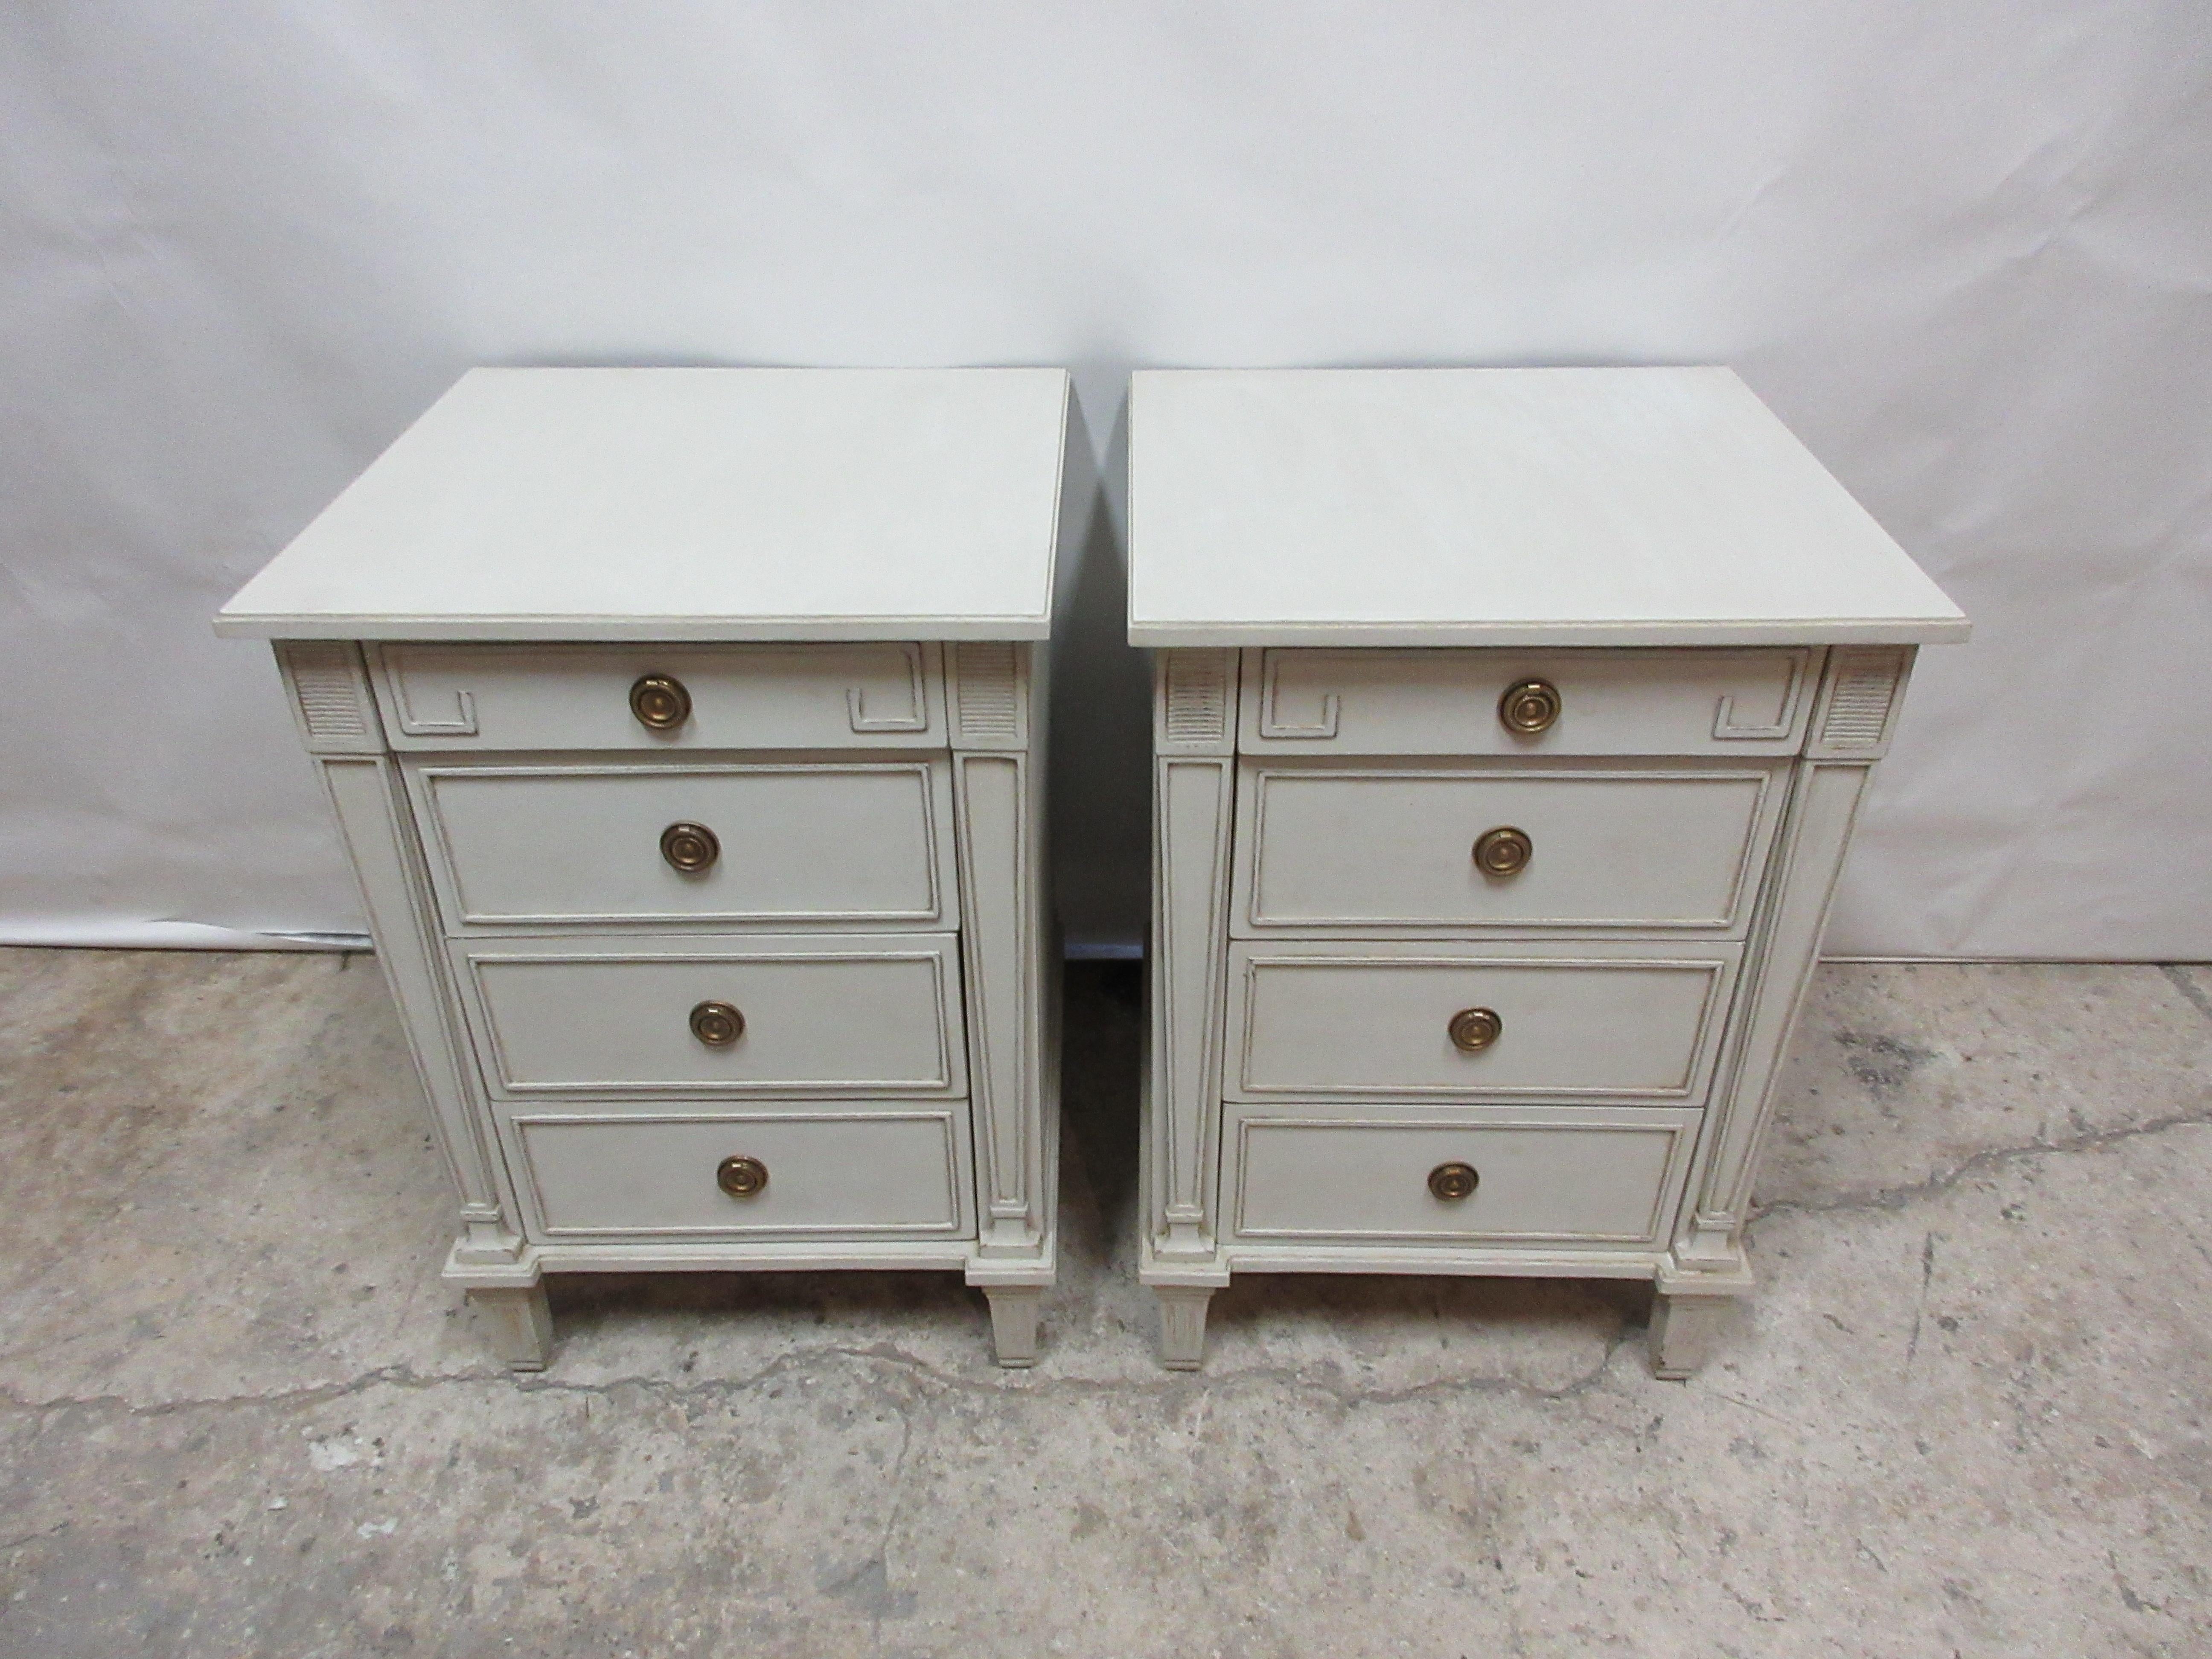 This is a set of 2 gustavian style night stands, they have been restored and repainted with Milk paints 